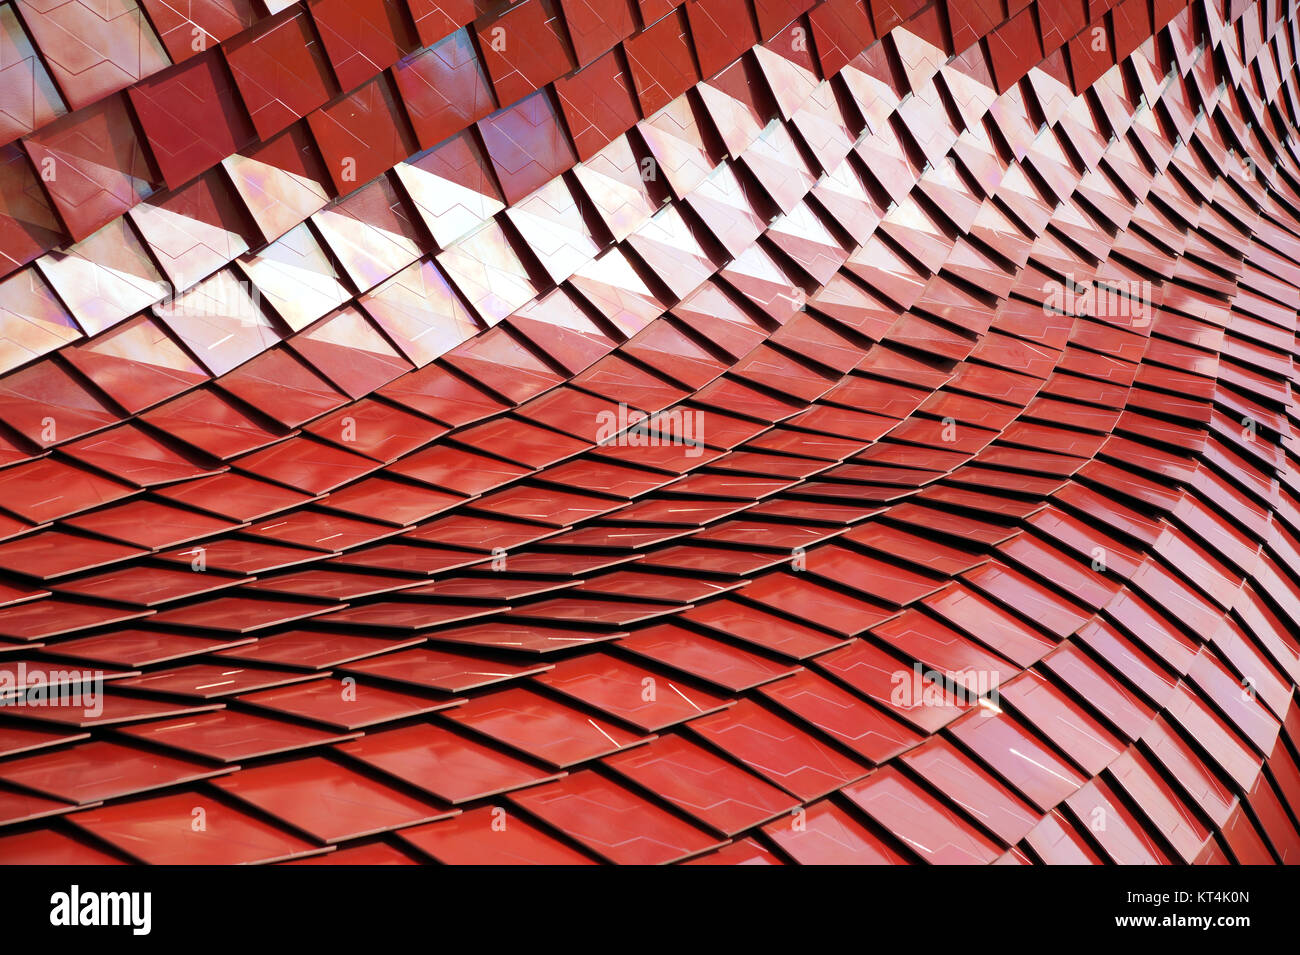 Red Tile Floor High Resolution Stock Photography and Images - Alamy